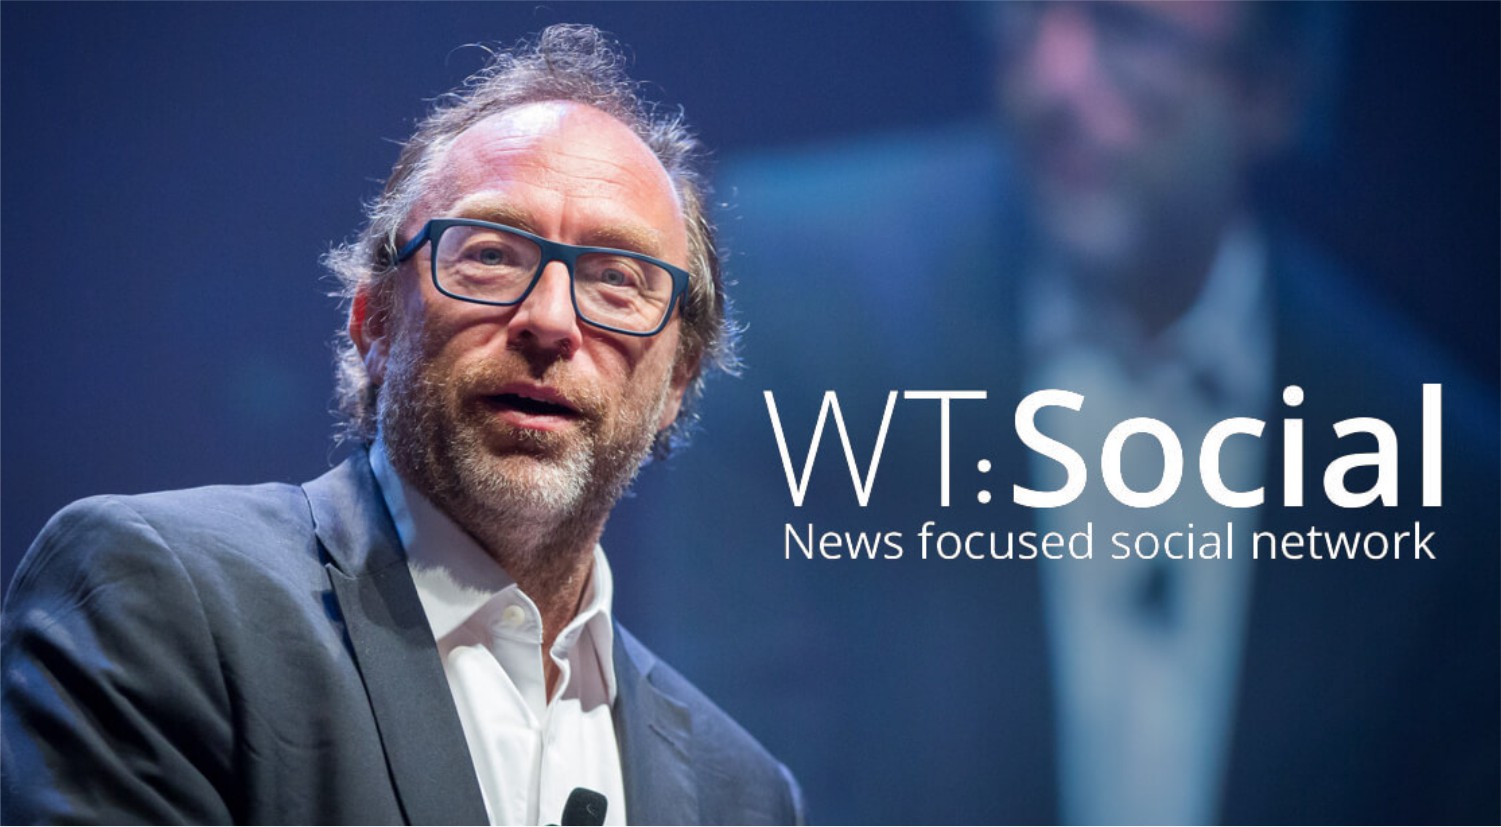 You are currently viewing Jimmy Wales a co-founder of Wikipedia launches a new social networking site called WT.Social.